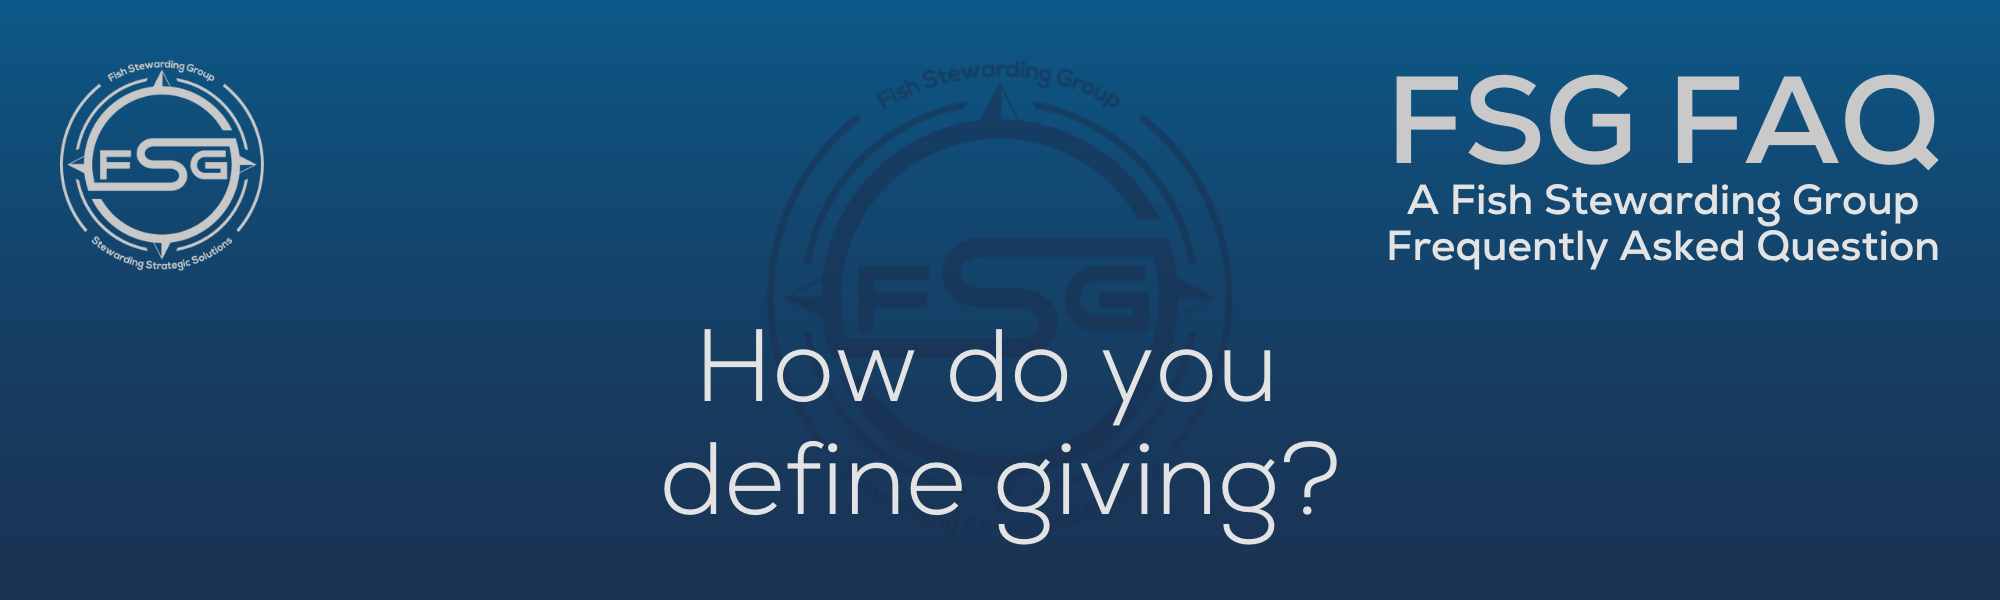 A rectangular and long thing Footer FAQ Image on the bottom of the How do you define giving? Page on the website. The background is a blue gradient color that goes from a dark blue on the bottom to a lighter blue on top. The text in lower center of the image in a light gray text that reads: How do you define giving? The text in gray in the upper right corner reads: FSG FAQ. Right beneath that is more gray text in a smaller font that reads: A Fish Stewarding Group Frequently Asked Question. On the upper left side is the FSG Logo in gray. The logo has the letters FSG in the middle with a circle with four pointed arrows facing north, south, east and west with the S connected to that circle. Four rounded lines make the next circle of the circle and the last layer is a thin circle with the text on the Bottom that reads Stewarding Strategist Solutions and on top, the text reads Fish Stewarding Group. And Lastly in the center background of the image is a watermarked FSG logo, faded in blue, in the background.